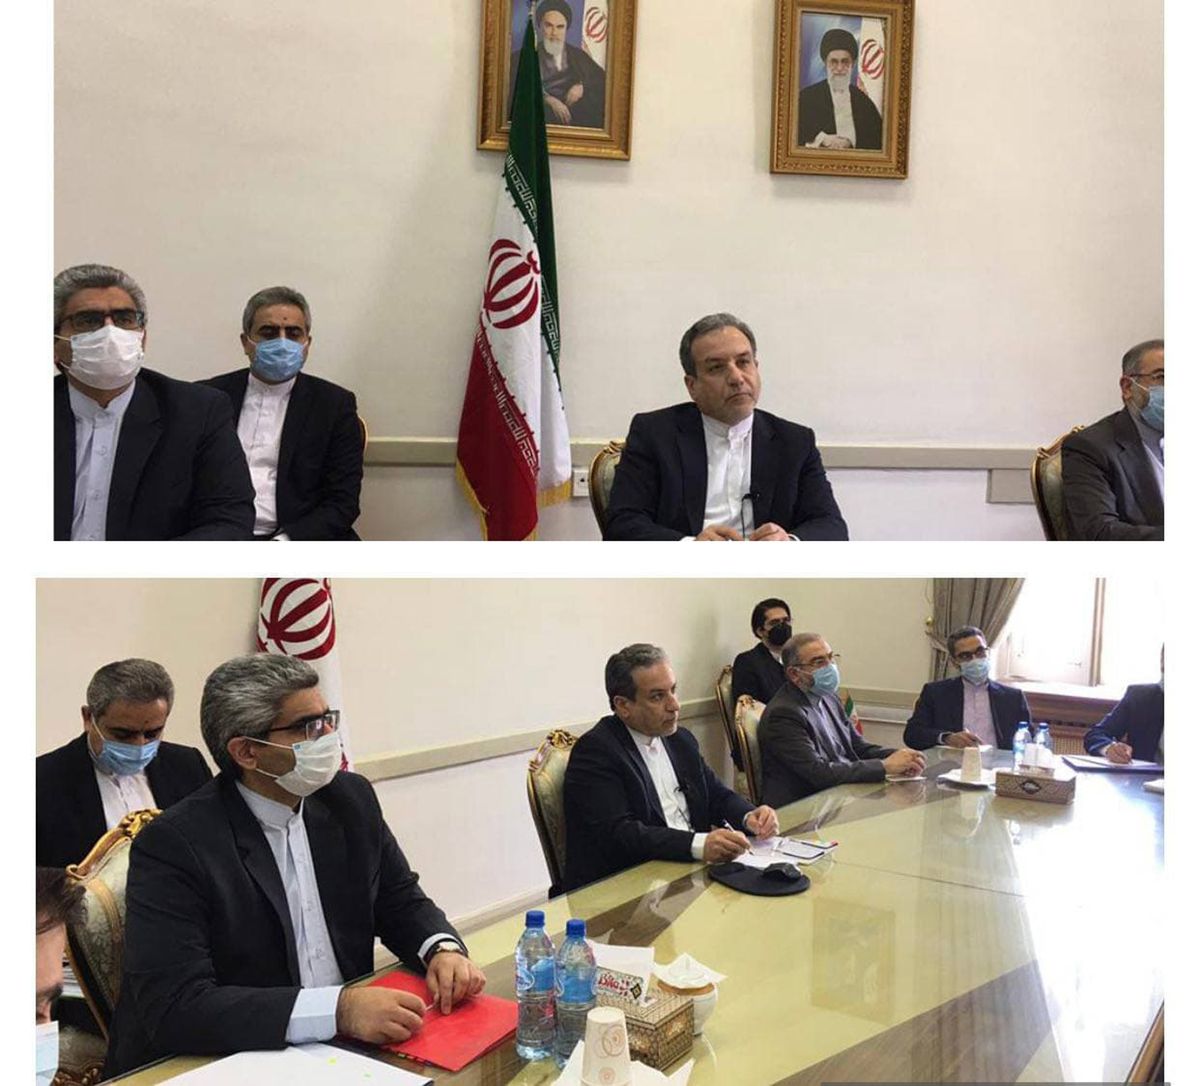 This combined photo released by the Iranian Foreign Ministry, shows Iranian diplomats attending a virtual talk on nuclear deal with representatives of world powers, in Tehran, Iran, Friday, April 2, 2021. The chair of the group including the European Union, China, France, Germany, Russia, Britain and Iran said that the participants "emphasized their commitment to preserve the JCPOA and discussed modalities to ensure the return to its full and effective implementation," according to a statement after their virtual meeting, referring to the acronym for the accord — the Joint Comprehensive Plan of Action. Abbas Araghchi, center, heads the Iranian diplomats. (HOGP)